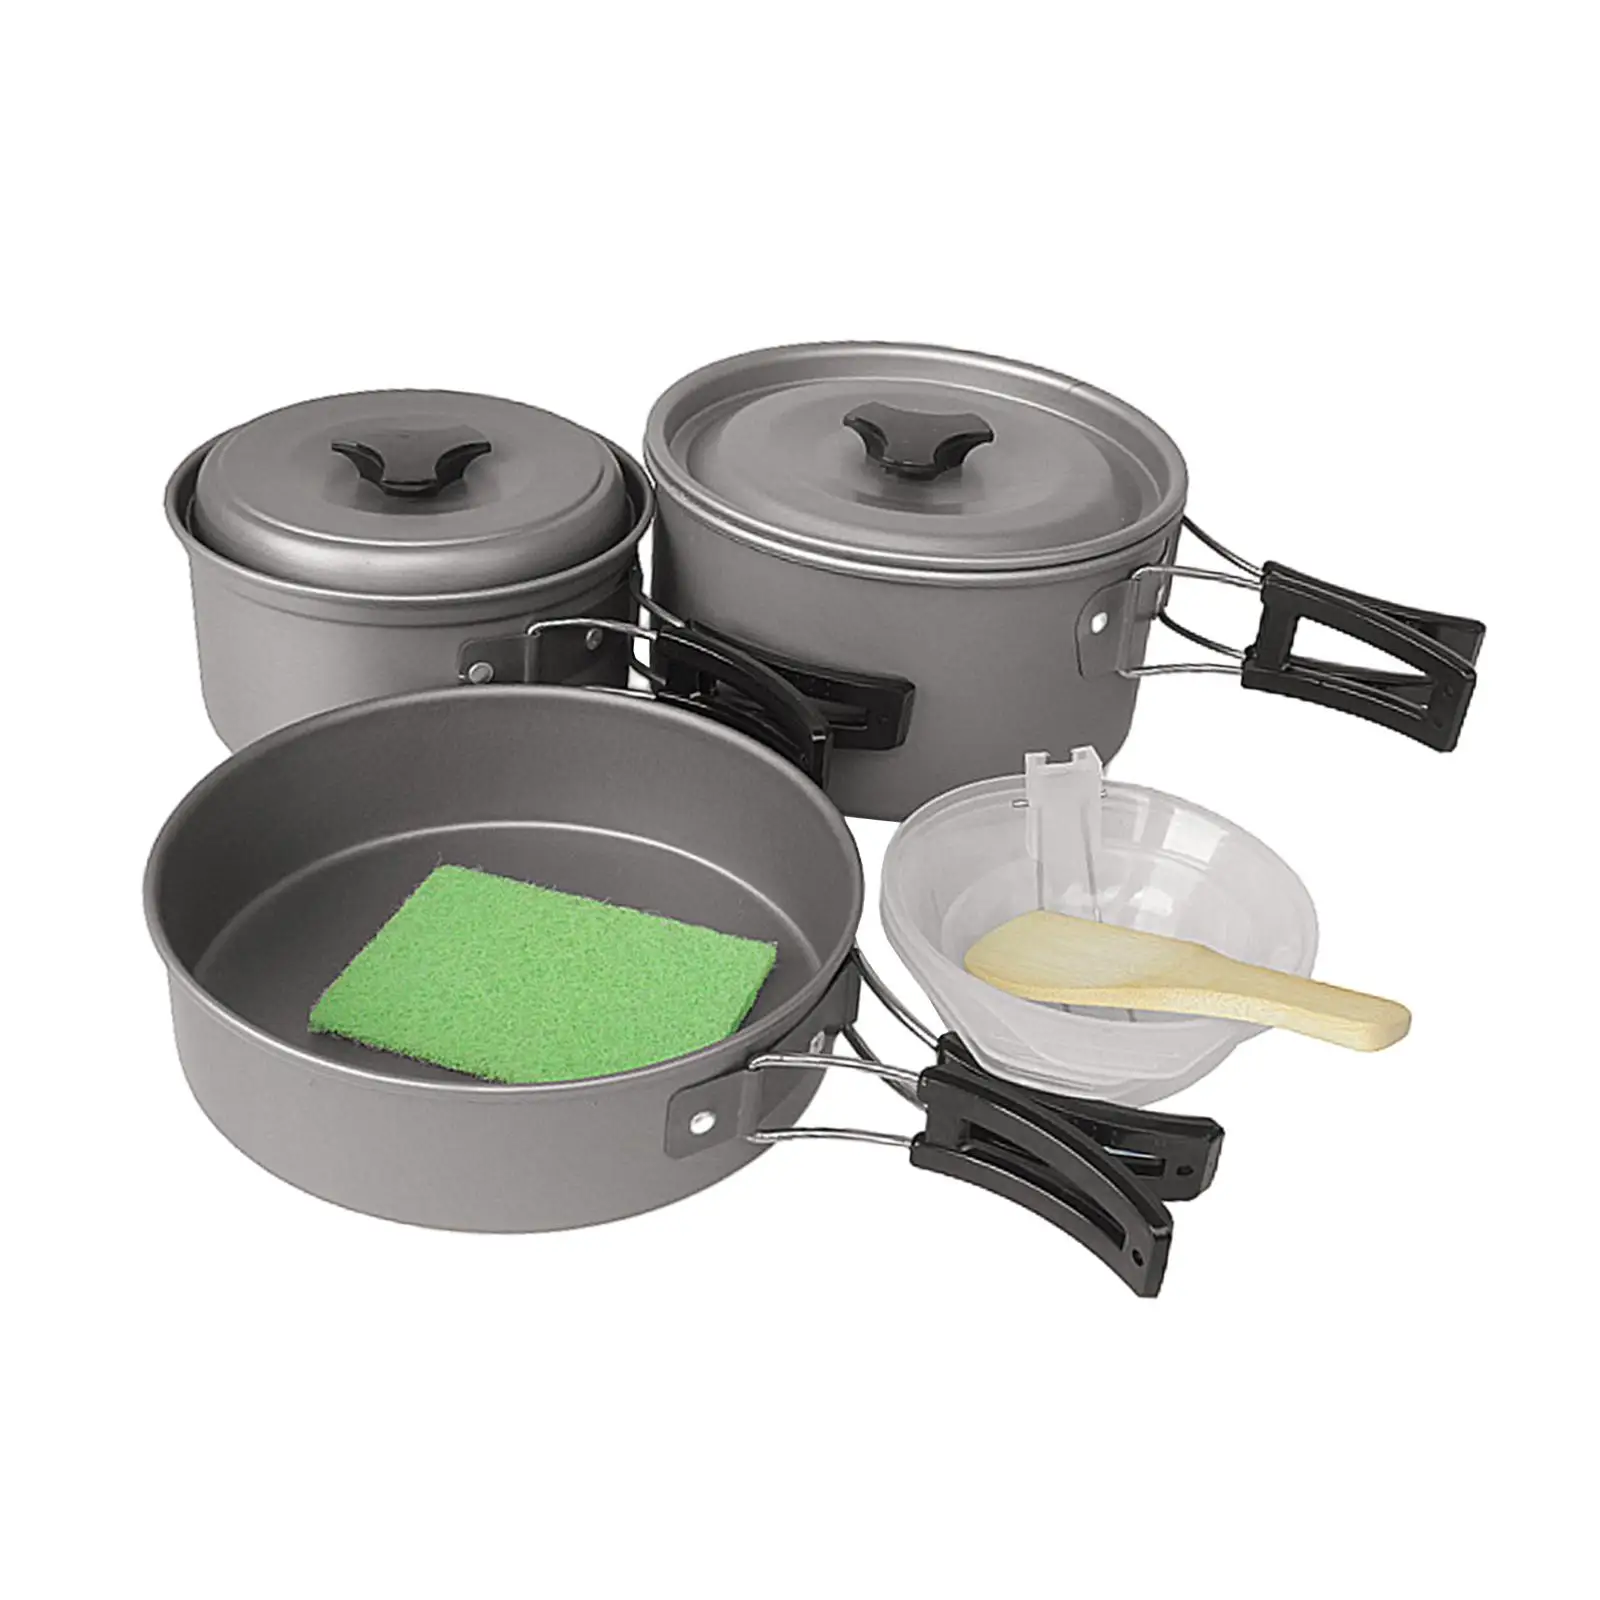 Camping Cookware Set Lightweight Pot and Pan for Outdoor Hiking Picnic